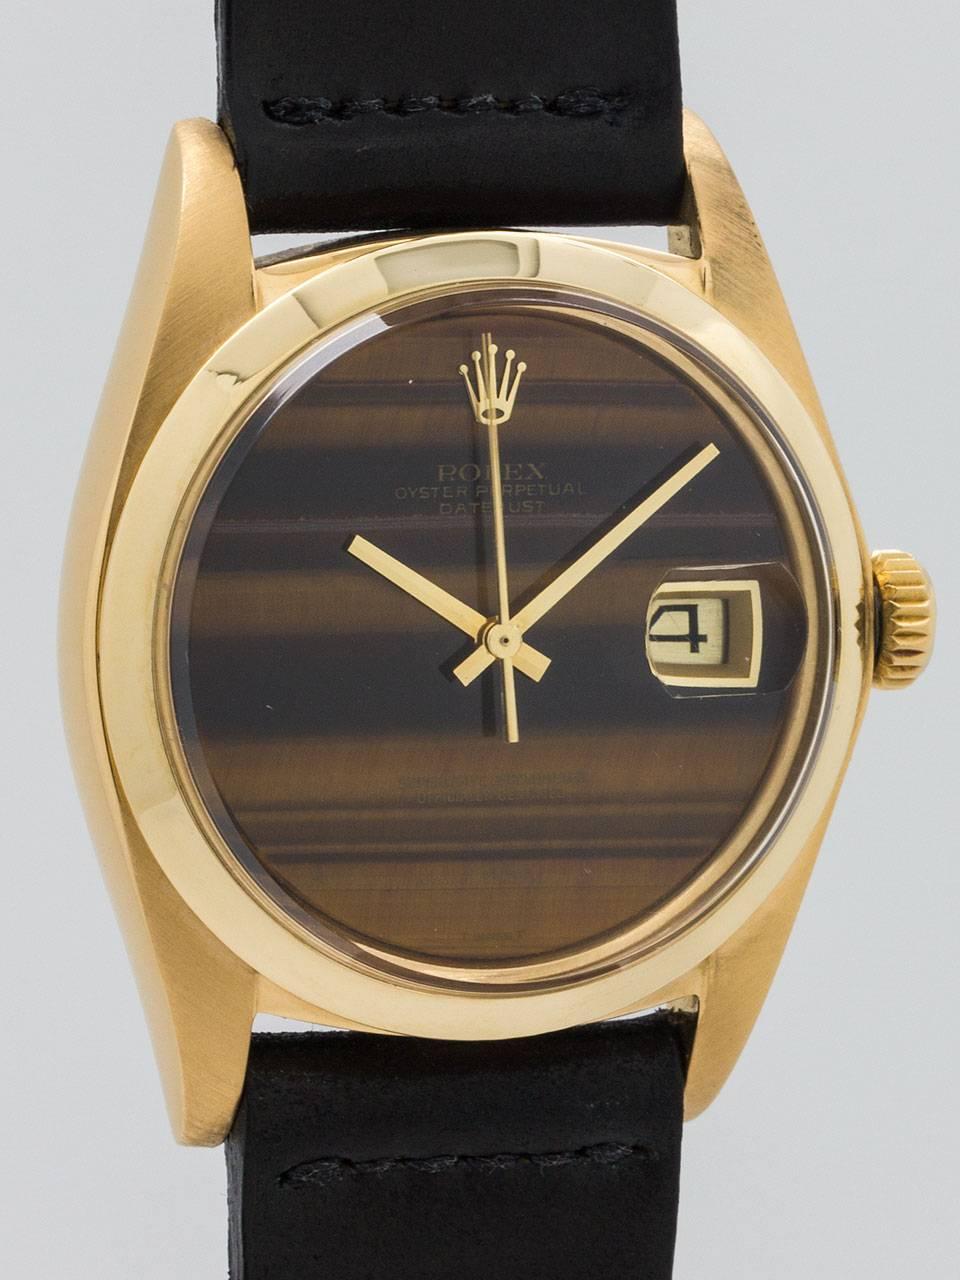 Vintage Rolex 18K Yellow Gold Datejust with factory Tiger’s Eye dial ref 1601  circa 1974. Full size man’s 36mm diameter case with smooth bezel and acrylic crystal. Original factory tiger’s eye stone dial with bold and prominent zoning, free of